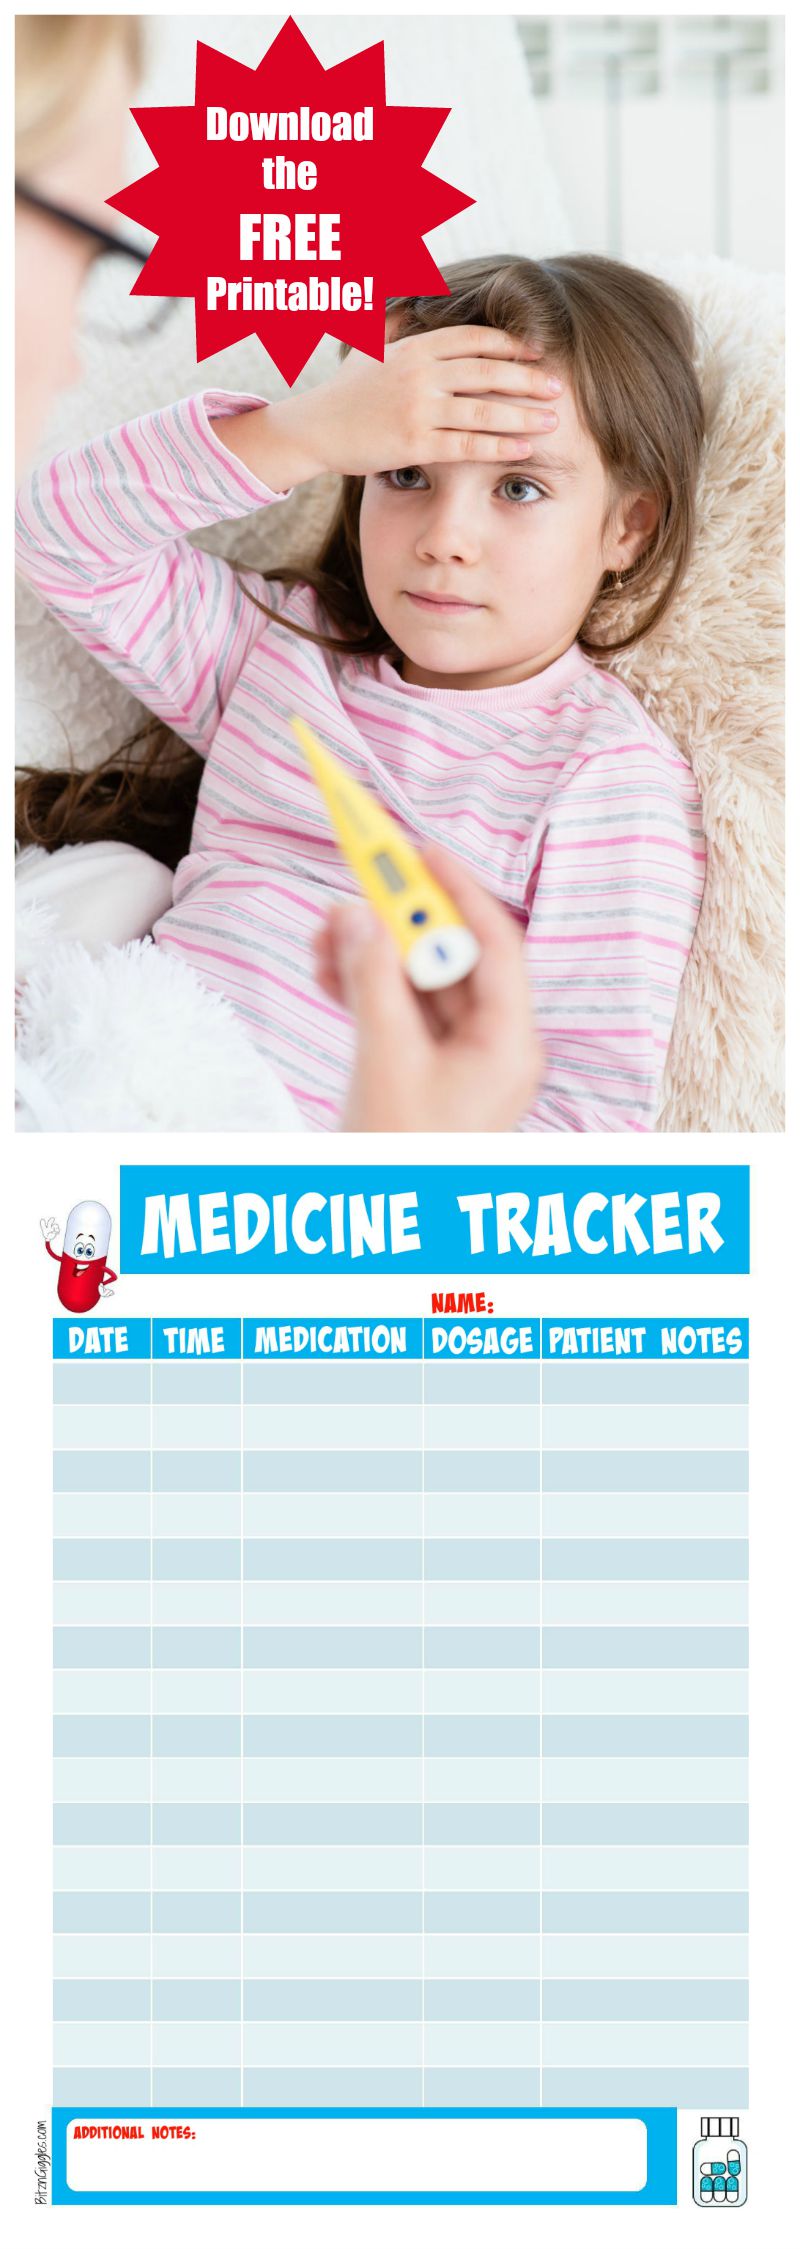 Printable Medicine Tracker - Stay on top of the medicine you're giving to your kids and share the information with their pediatrician when necessary!